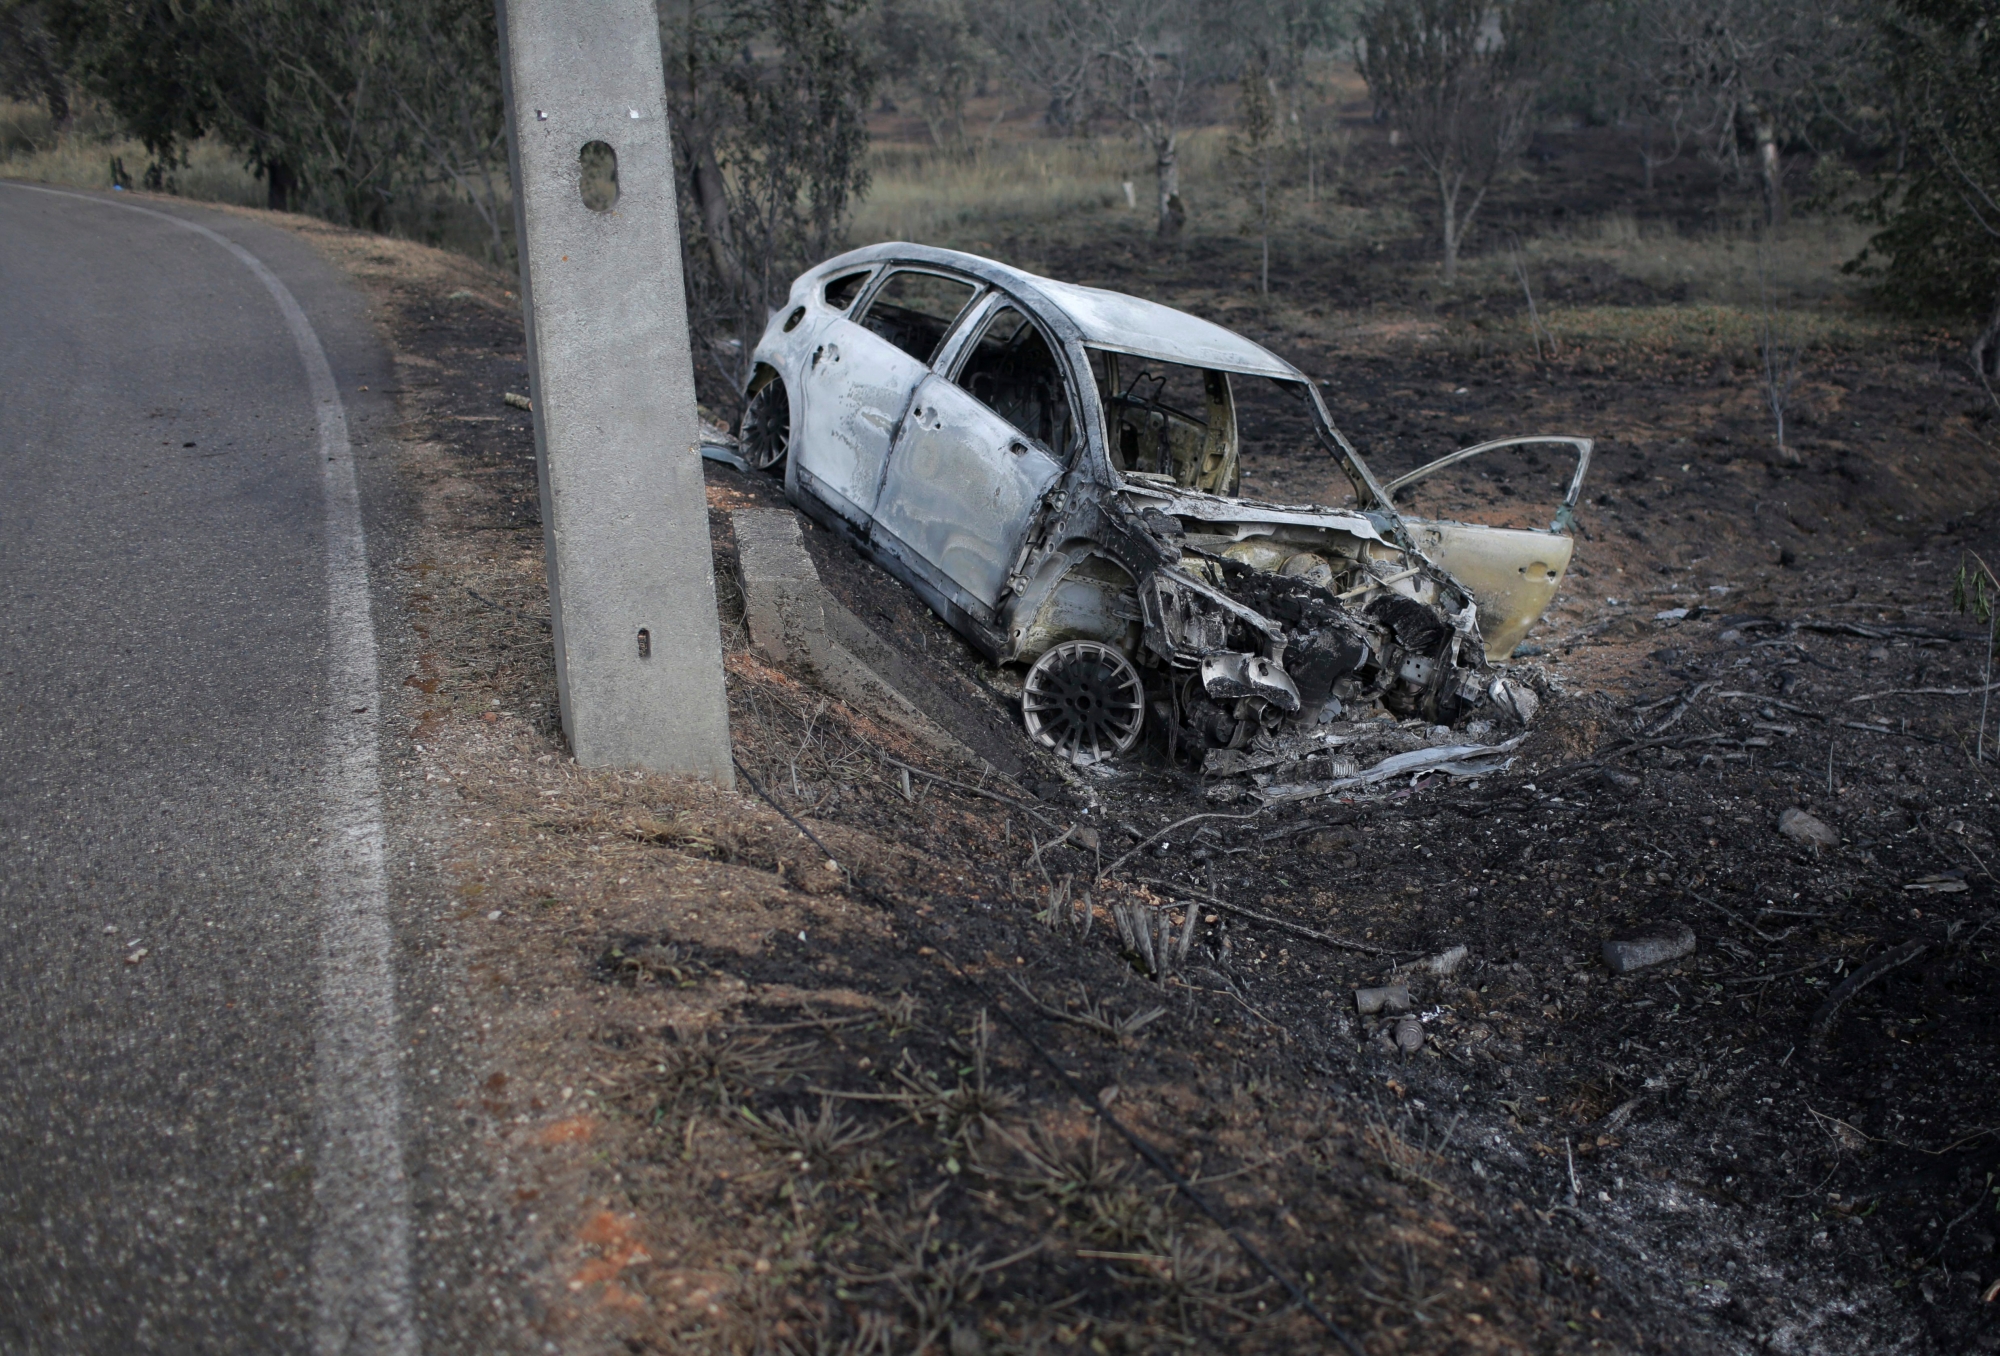 A burnt car lies where it went off the road in the village of Nodeirinho, near Pedrogao Grande, central Portugal, Monday, June 19 2017. At least 11 people were killed in the village Saturday when it was swept by a forest fire. Raging forest fires in central Portugal killed at least 62 people, many of them trapped in their cars as flames swept over roads Saturday evening. (AP Photo/Armando Franca) Portugal Forest Fires